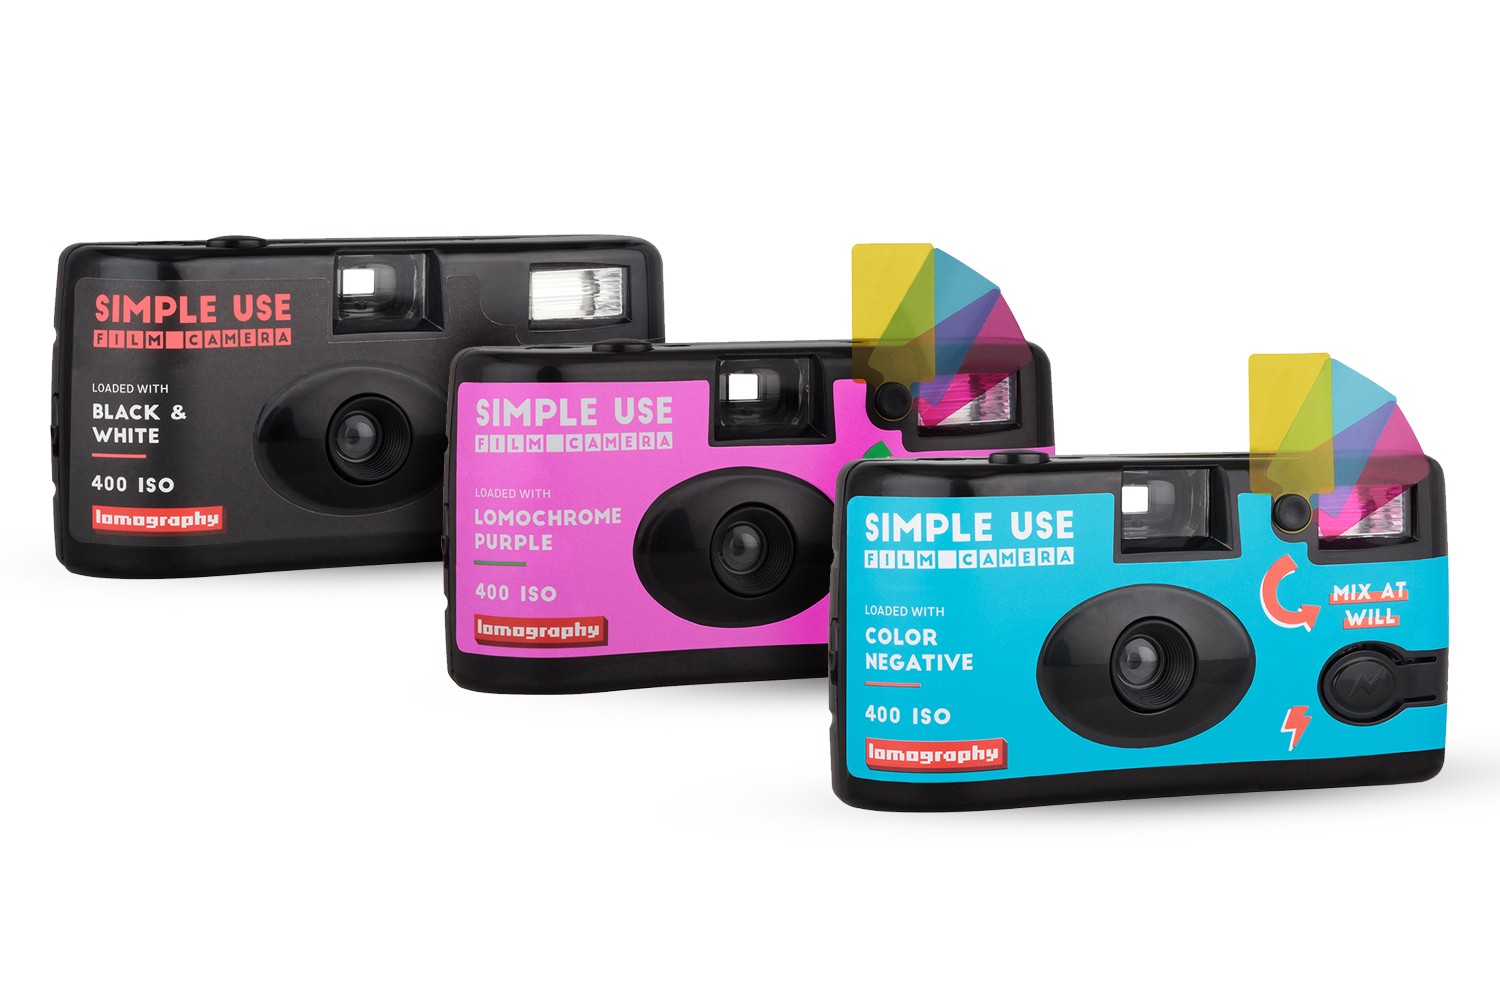 Lomography’s New Disposable Cameras Are Pretty Adorable